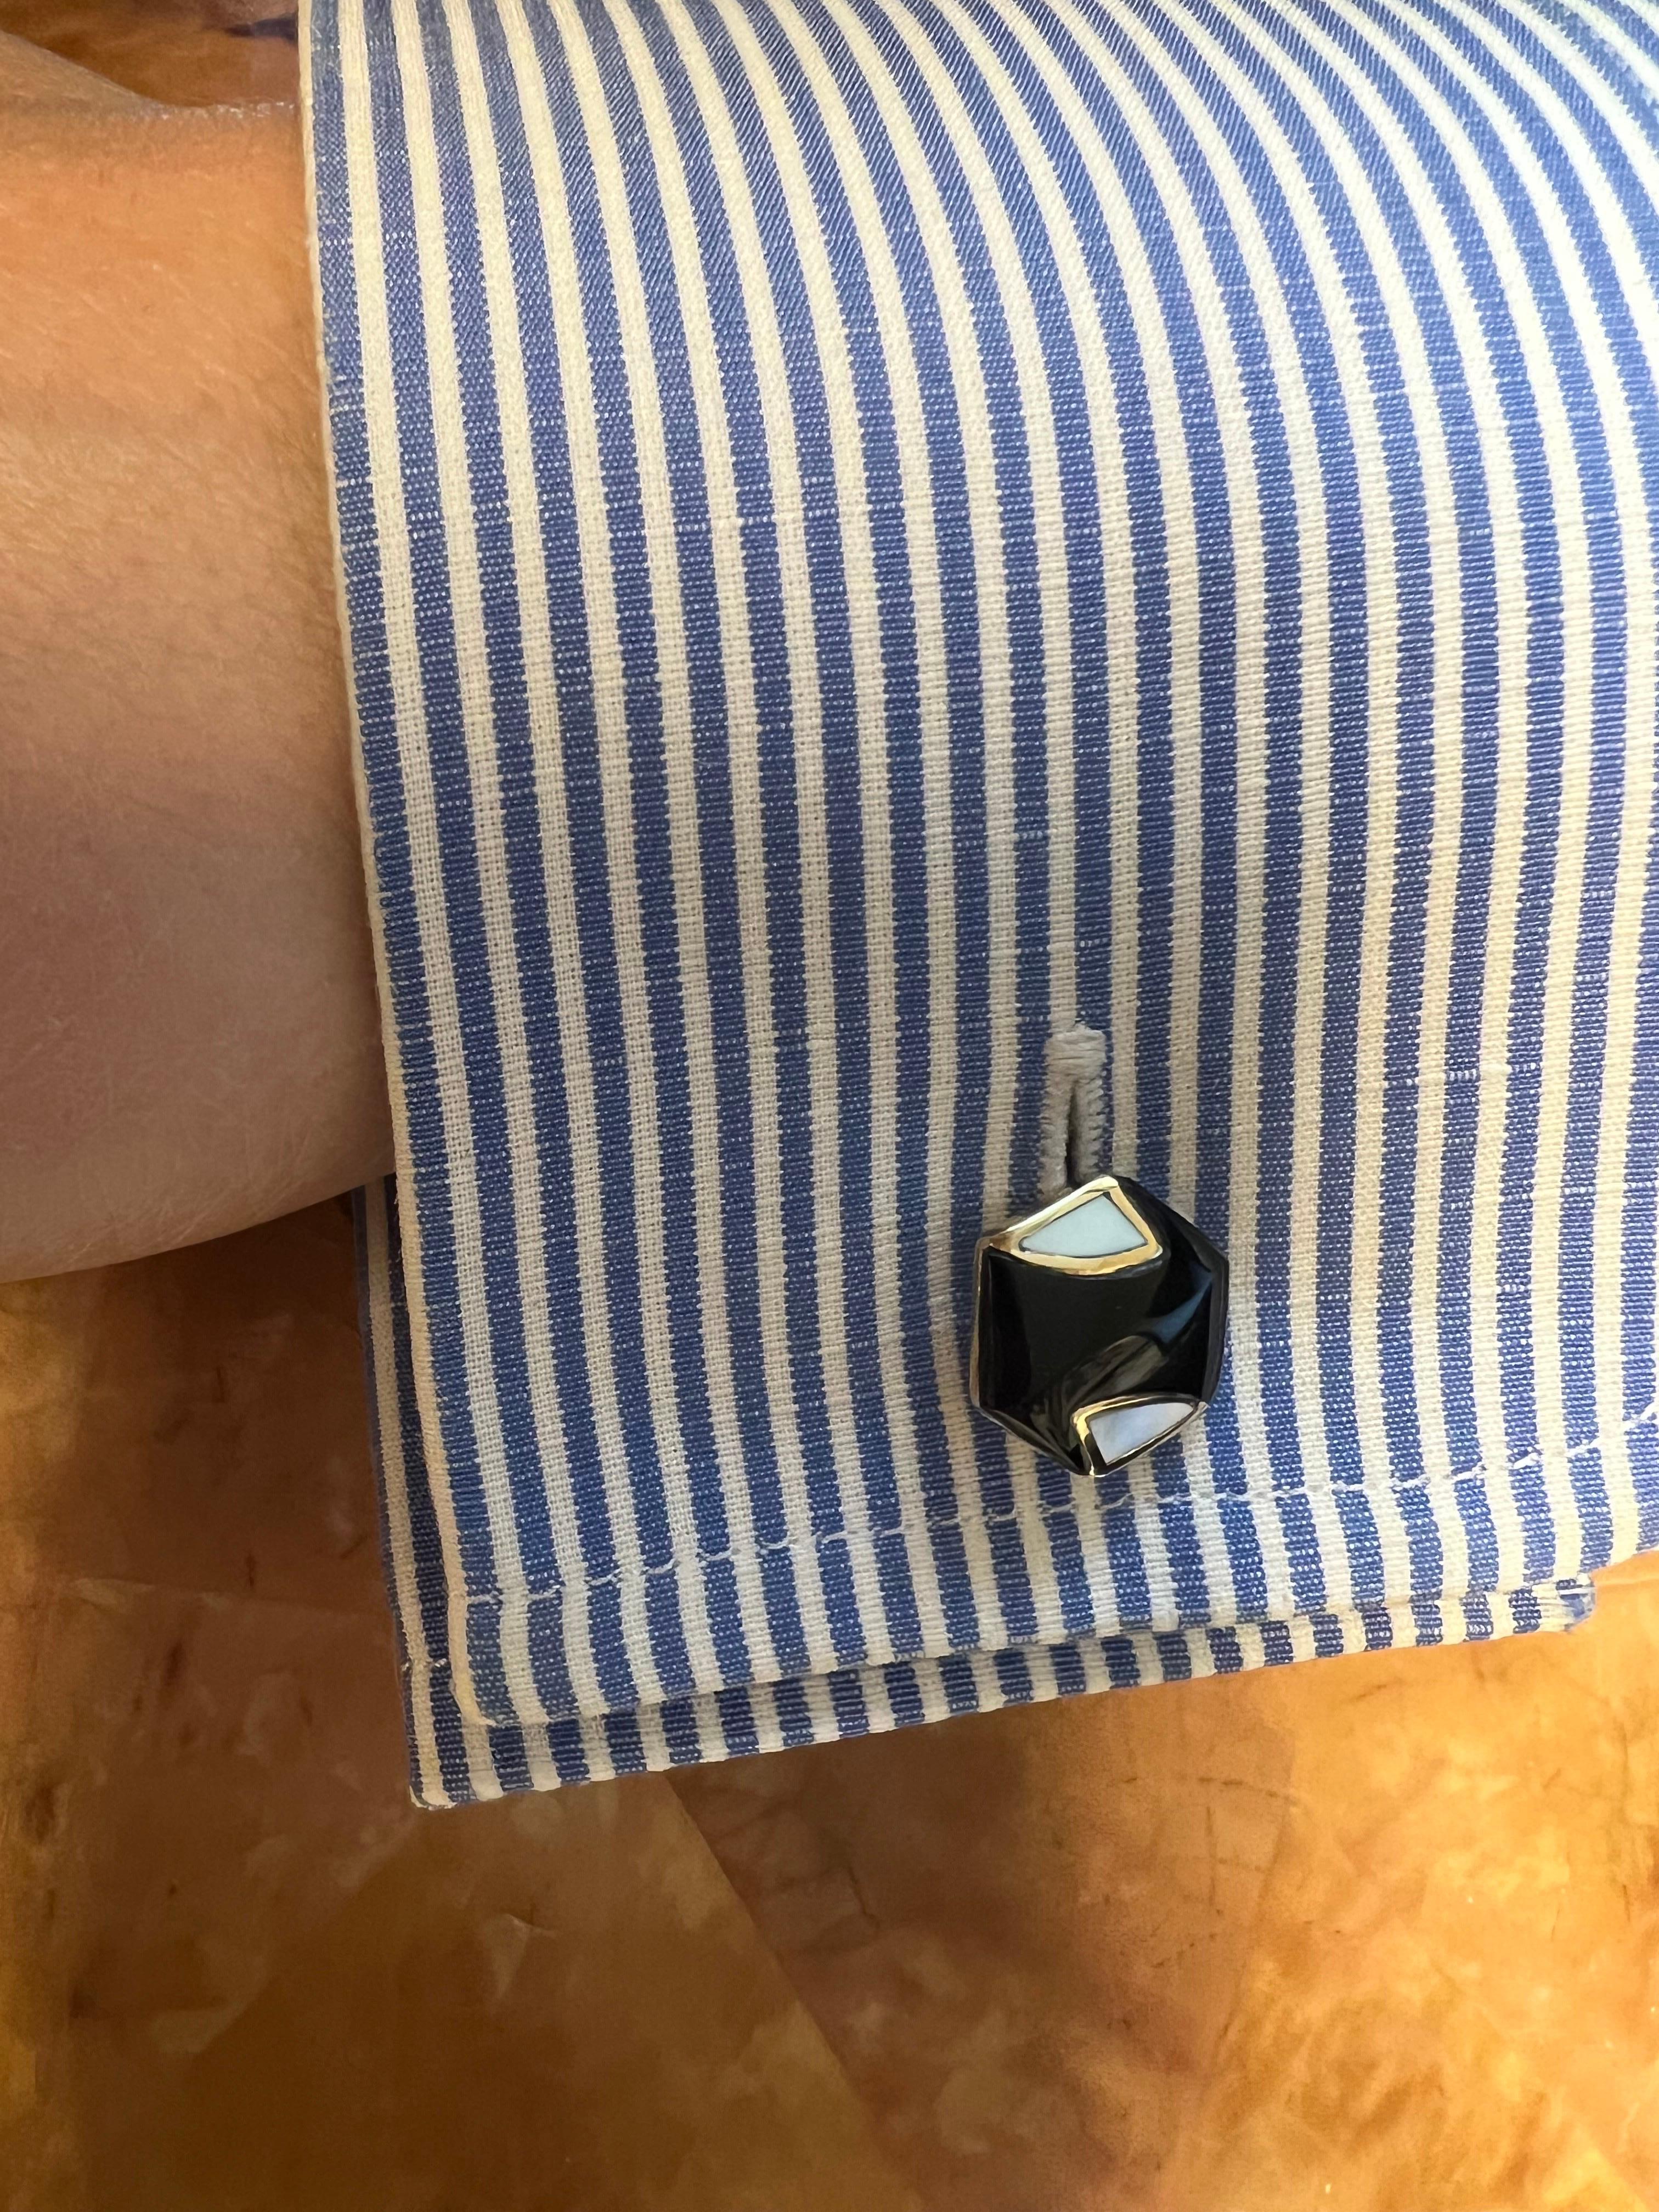 These double-sided cufflinks are a stunning accessory for the discerning gentleman. Crafted from 18k yellow gold, they feature a unique hexagon shape that adds a touch of modern sophistication to any outfit. The black onyx and mother-of-pearl stones